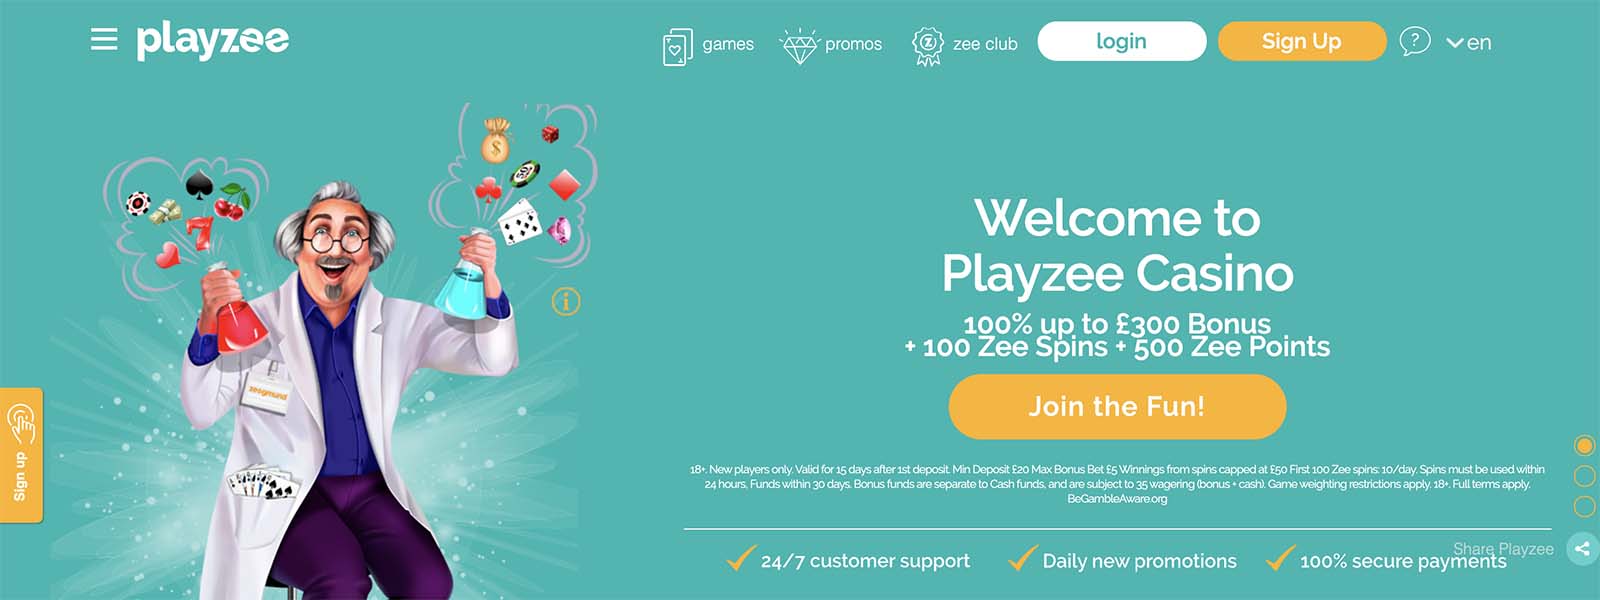 Playzee Casino is an online casino, home to hundreds of different games which includes slots and table games, card and video poker games and they have a live casino s can enjoy titles here from multiple gaming providers like Microgaming, NetEnt, Play’n GO, Quickspin, 1x2 Gaming, Big Time Gaming and Evolution site is available in multiple languages that include English.